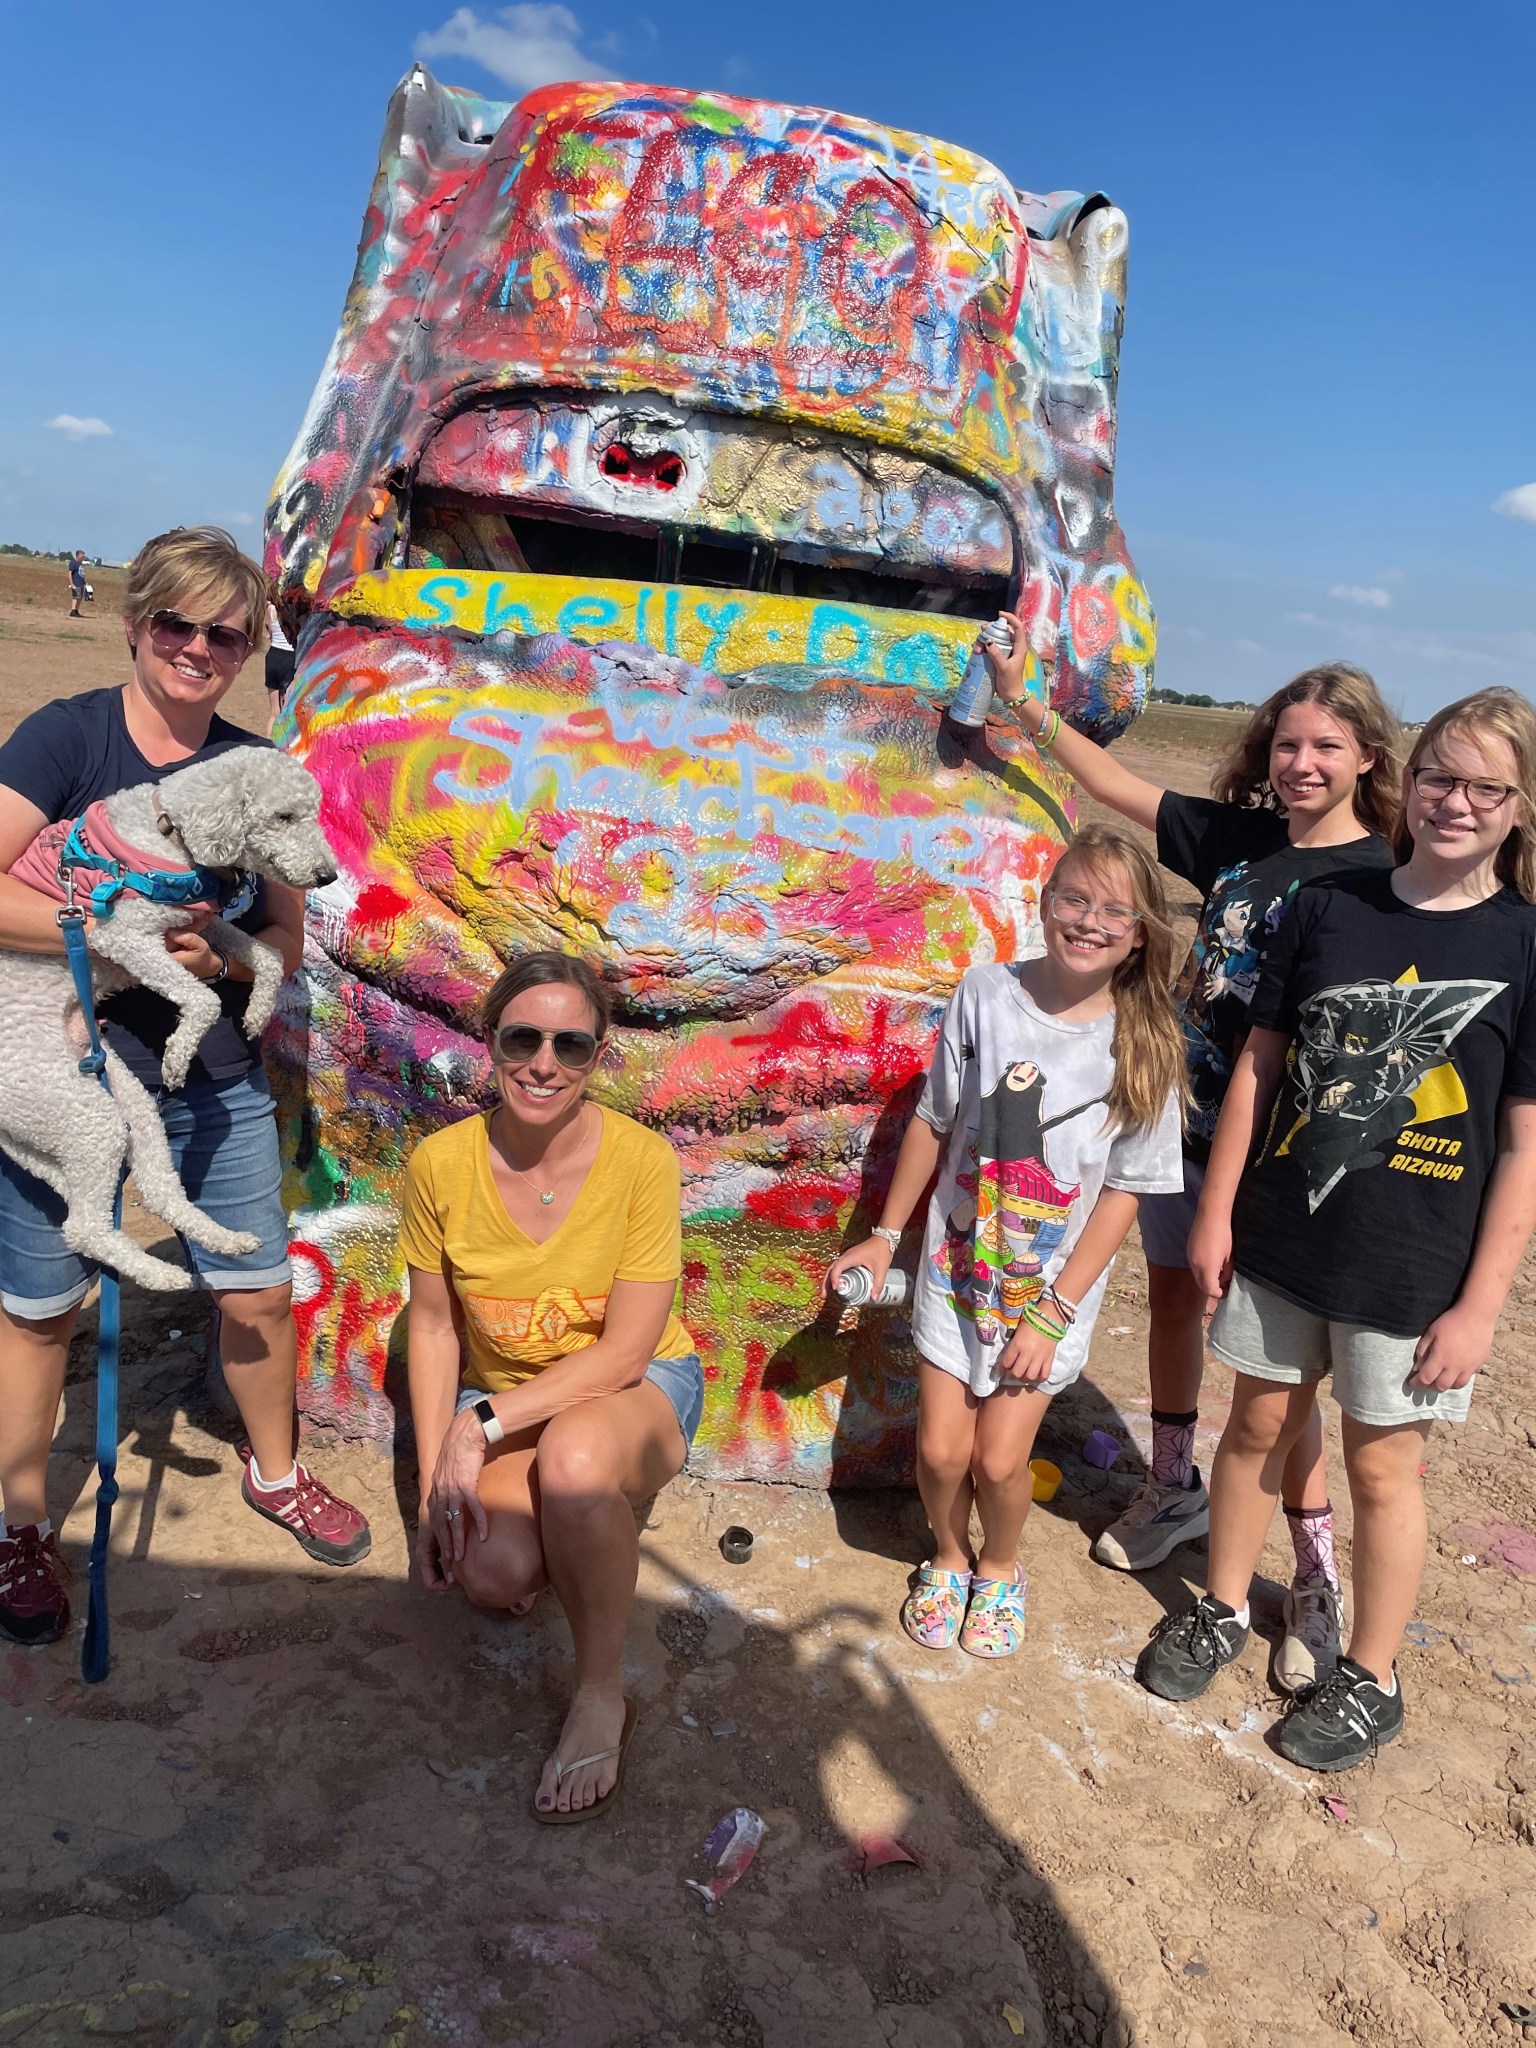 A family of five - two moms and three daughters - pose with their dog in front of a graffitied statue.